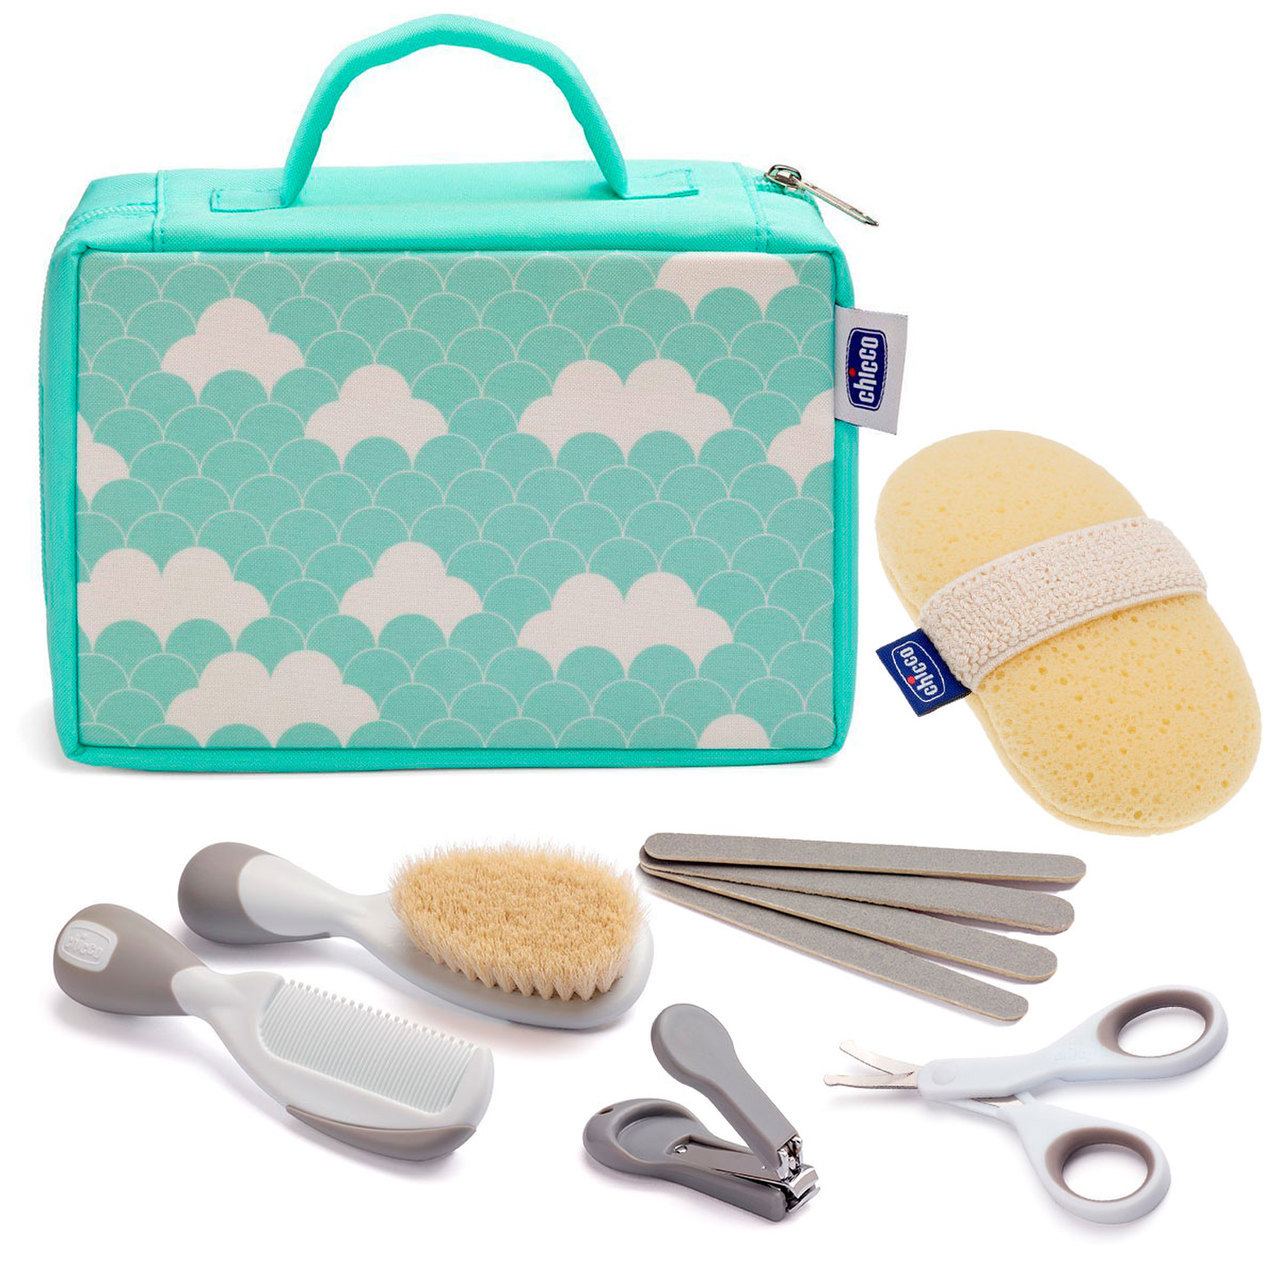 Baby-Reise-Set Chicco 6 in 1